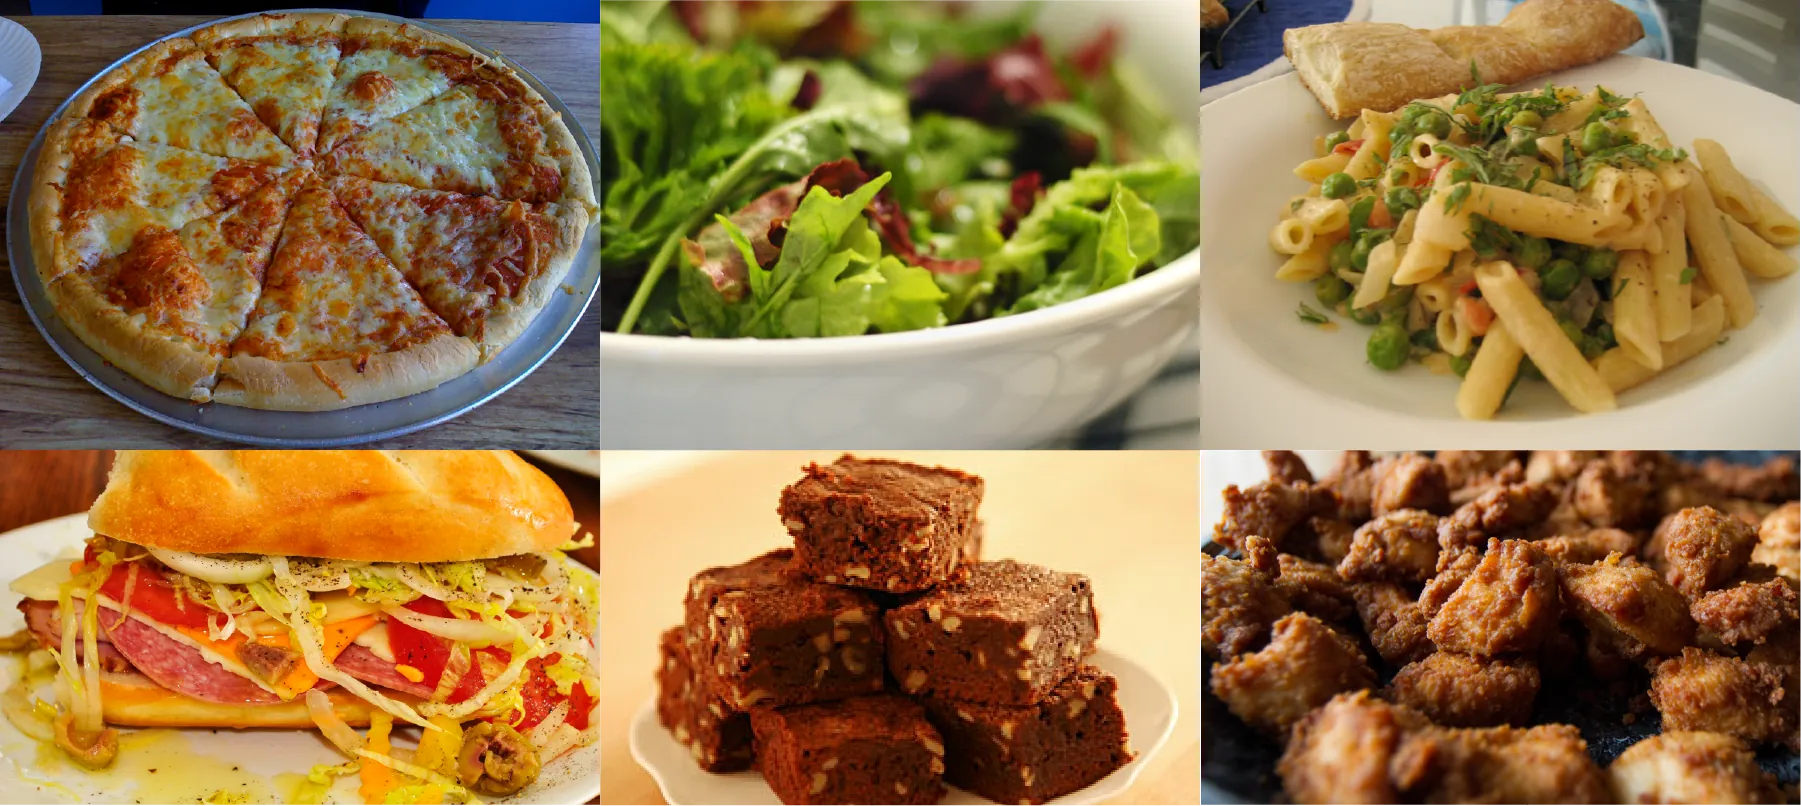 Six photos show different food products available: pizza, salad, pasta, a sub sandwich, brownies, and breaded chicken wings.